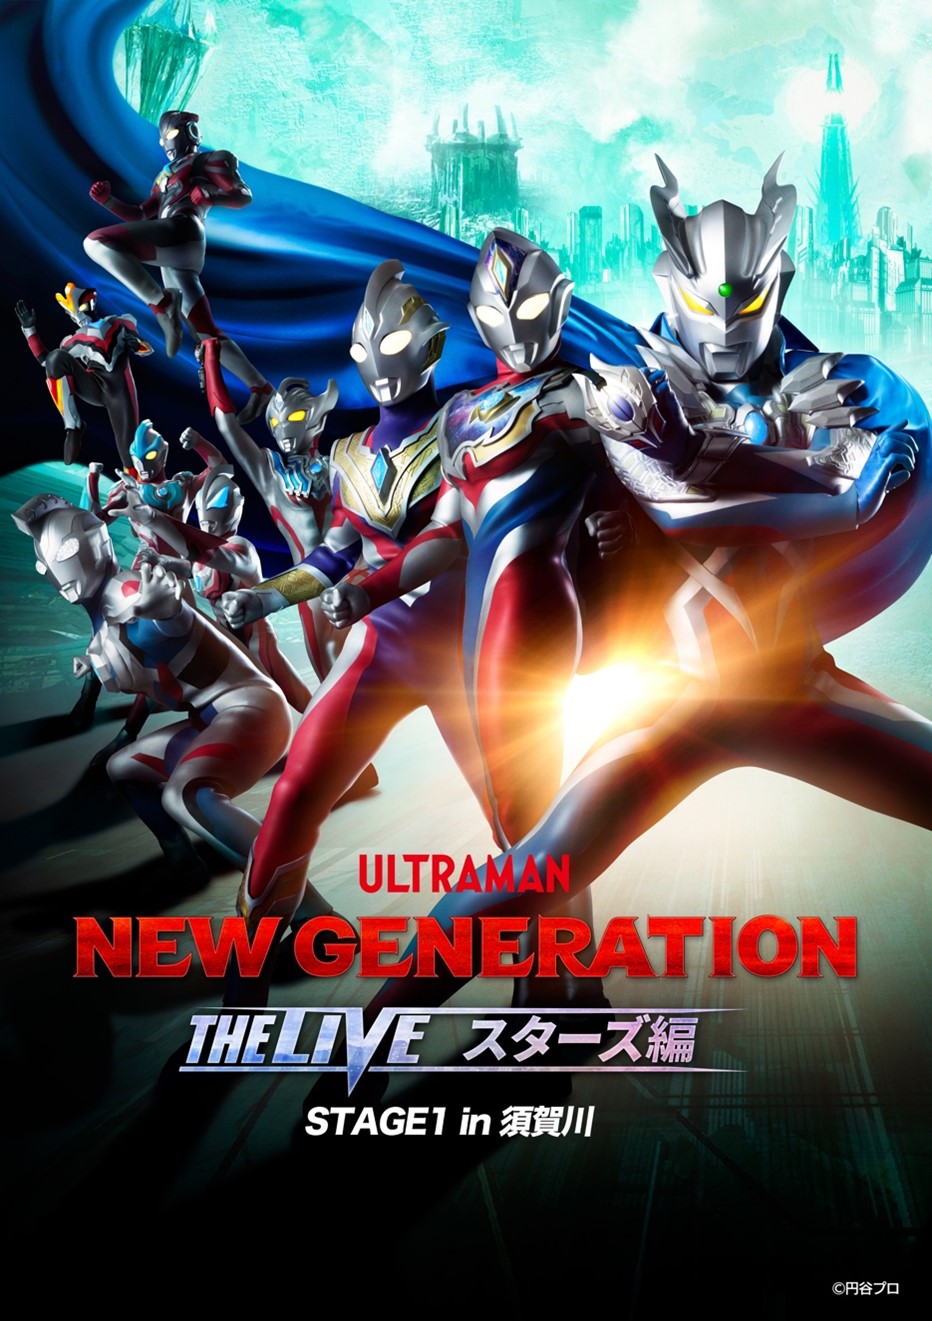 NEW GENERATION THE LIVEスターズ編 STAGE1 in須賀川」5月27日(土)、28 